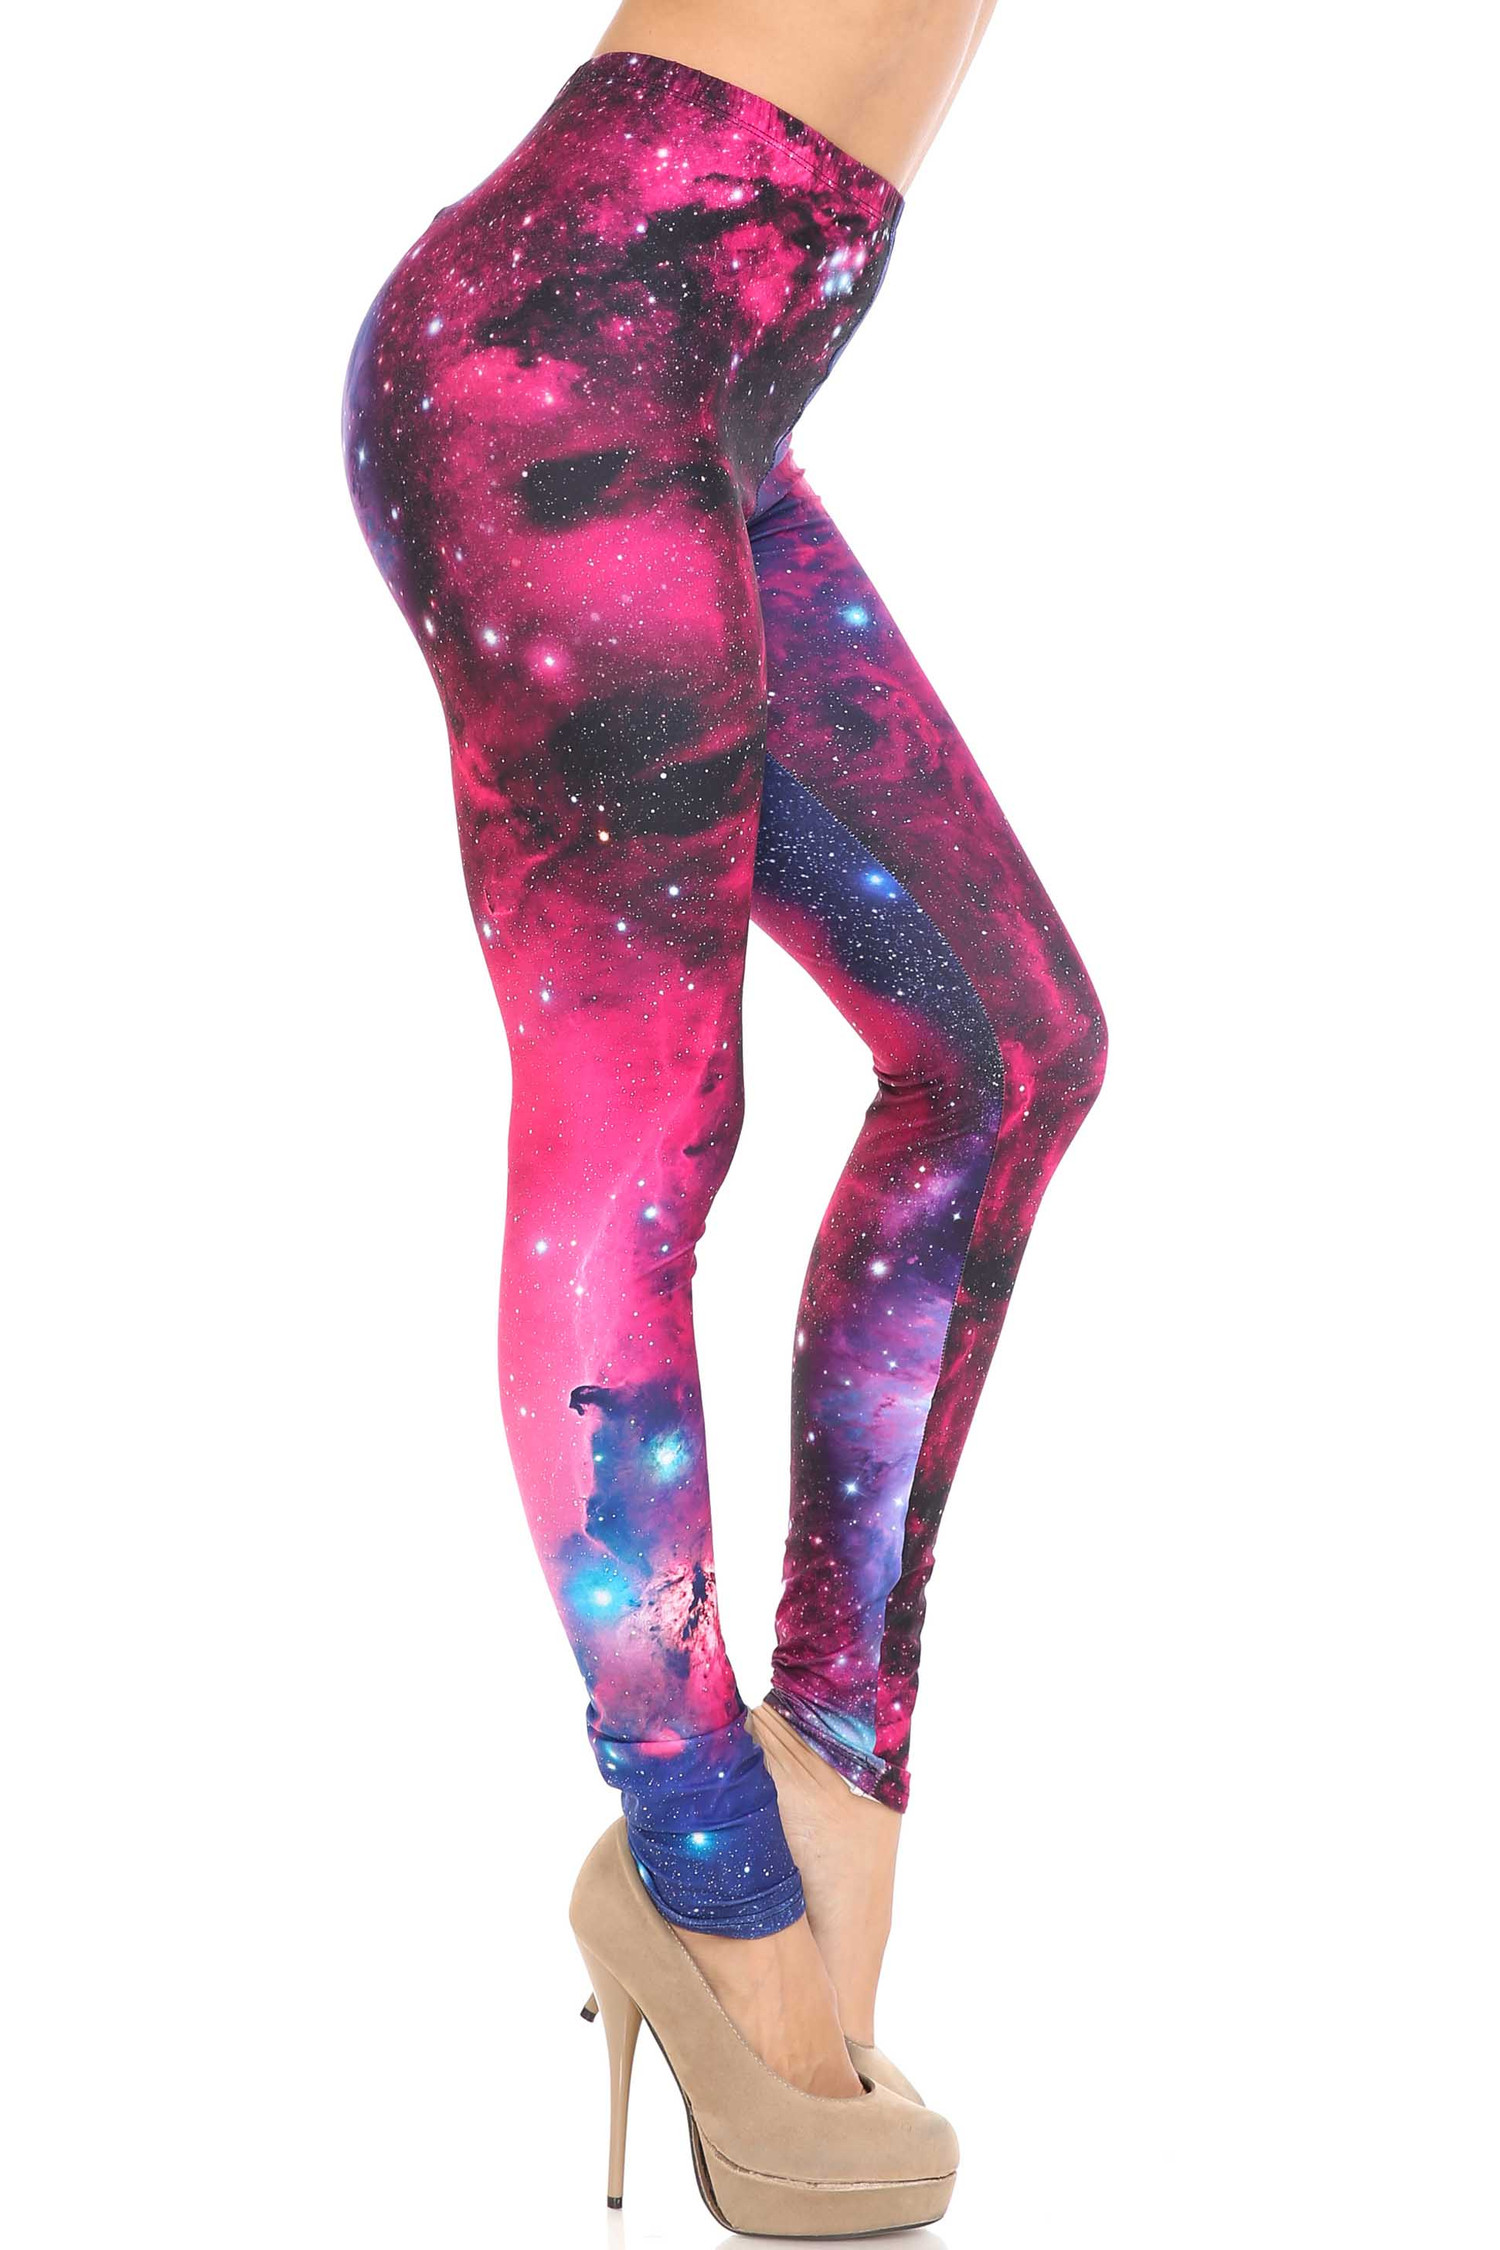 Tiger Galaxy Legging and Hollow Out Tank Top Set Outfit For Women Sport  Yoga Suit Summer Outfits Plus Size xs-8xl - AliExpress